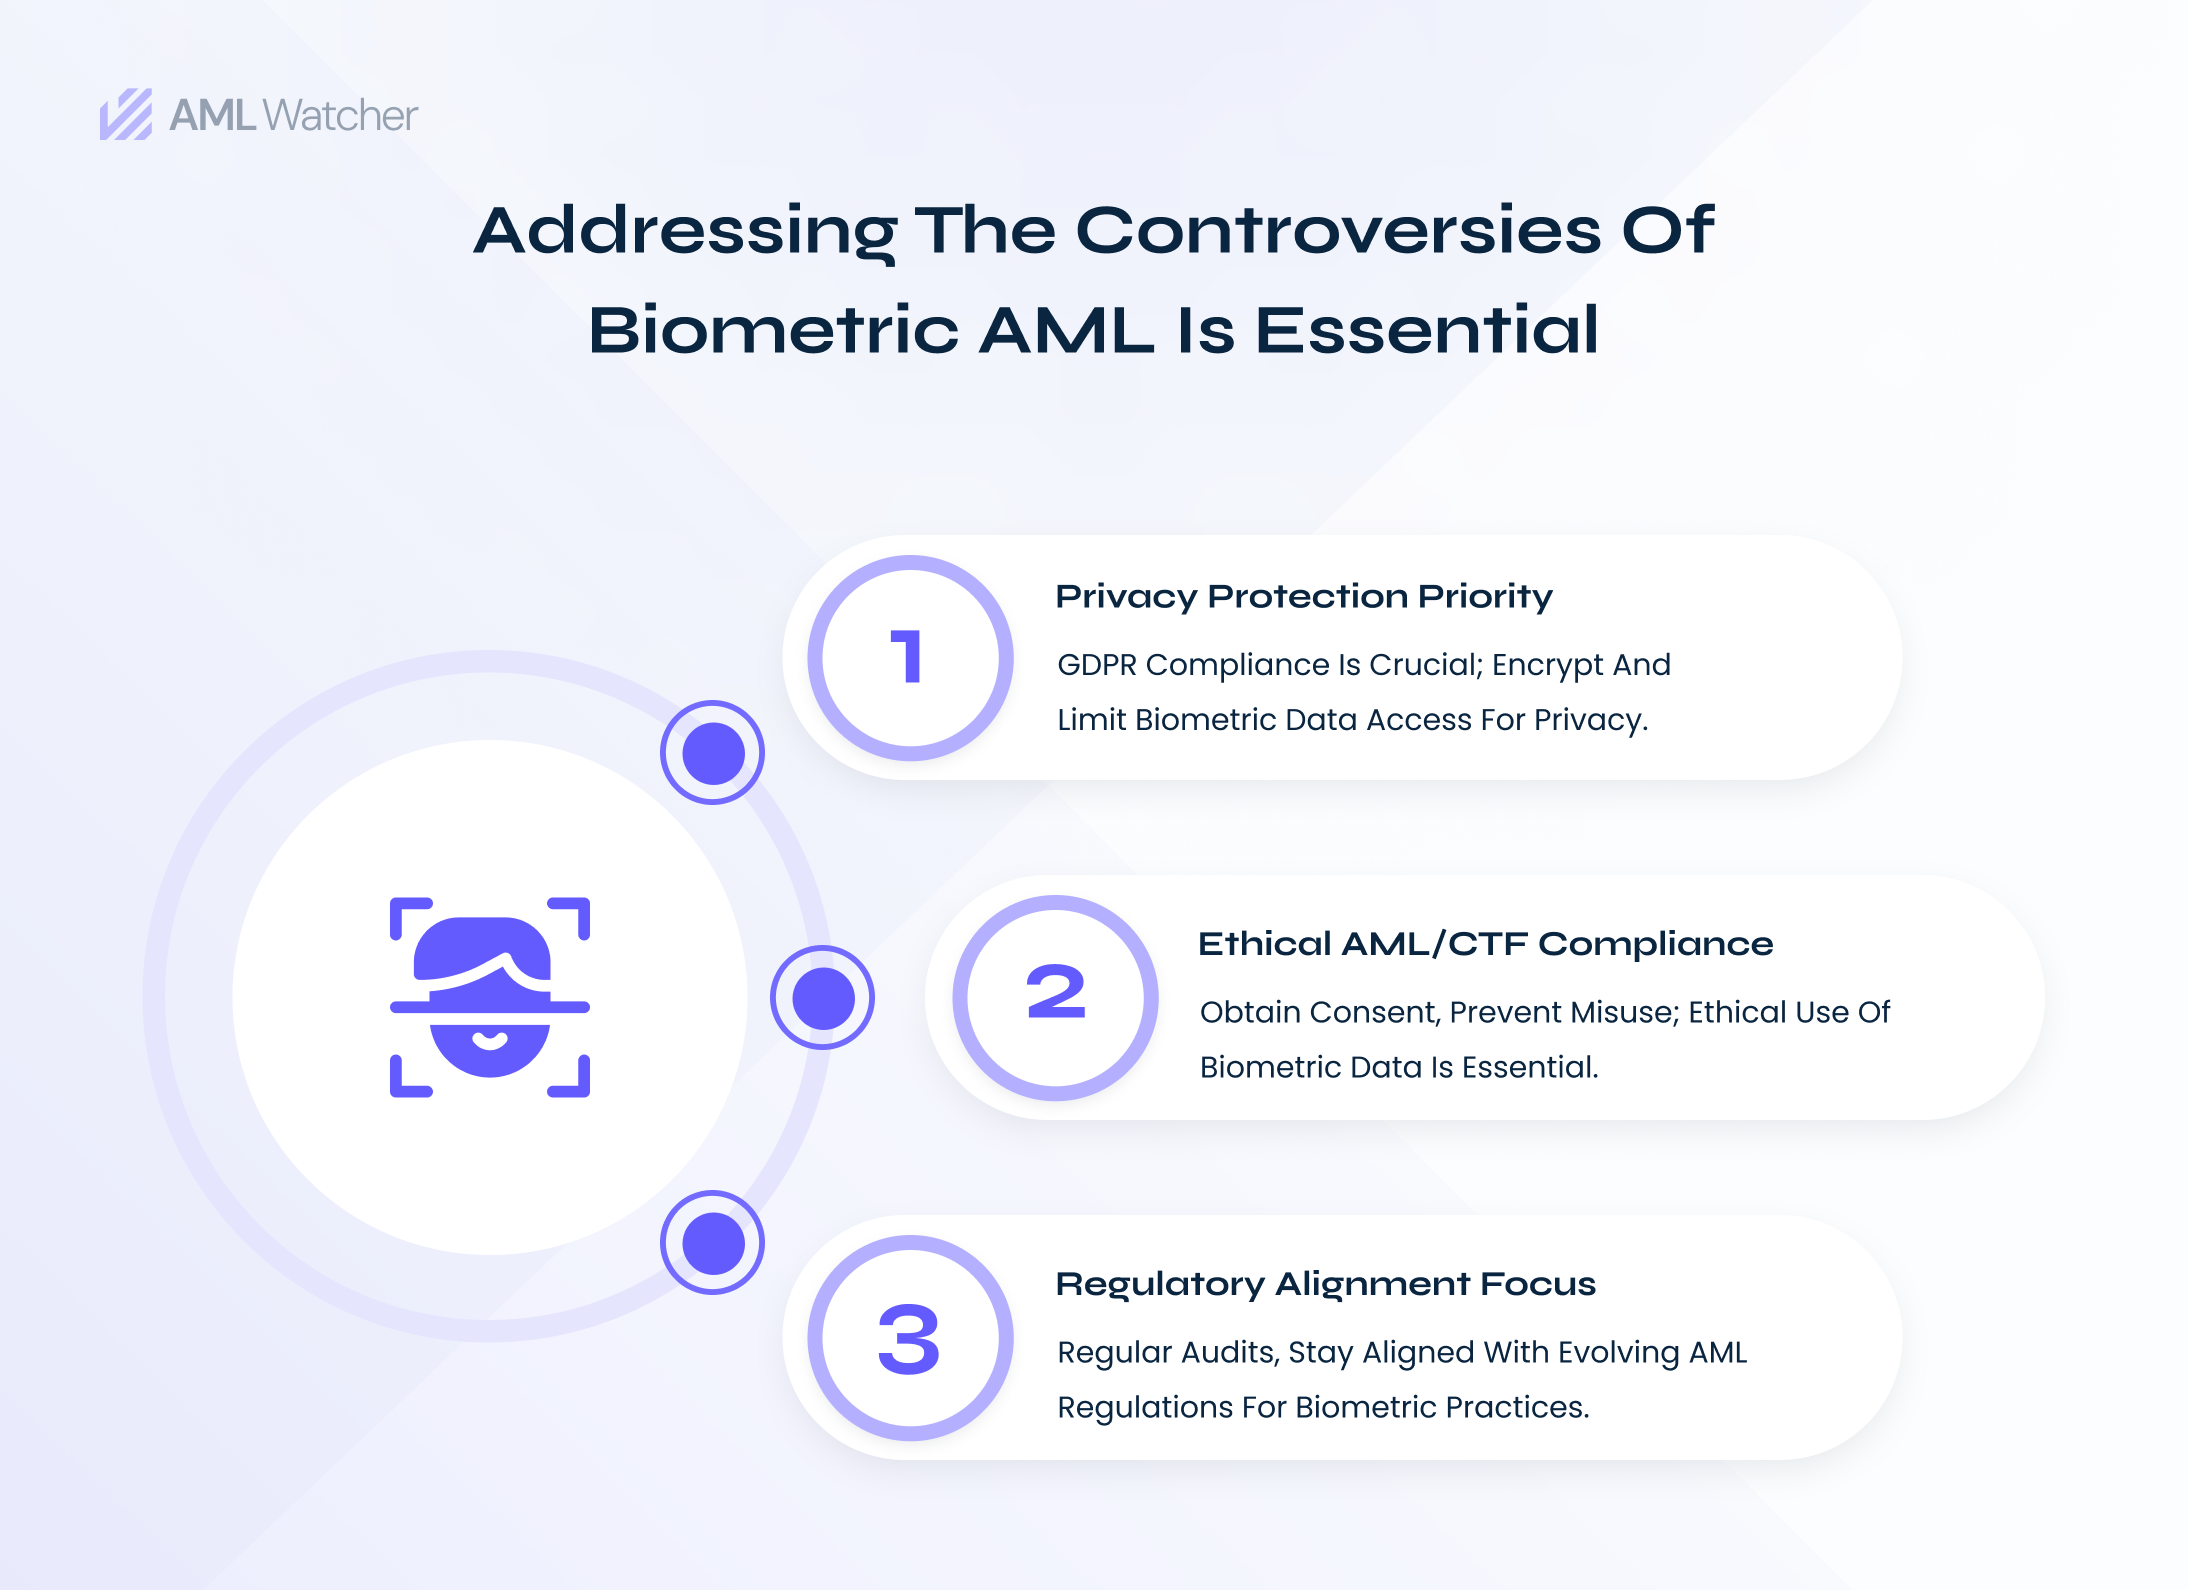 a comprehensive analysis of facets addressing the biometric AML controversies including protection of client data, ethical practices, and regulatory alignment. 